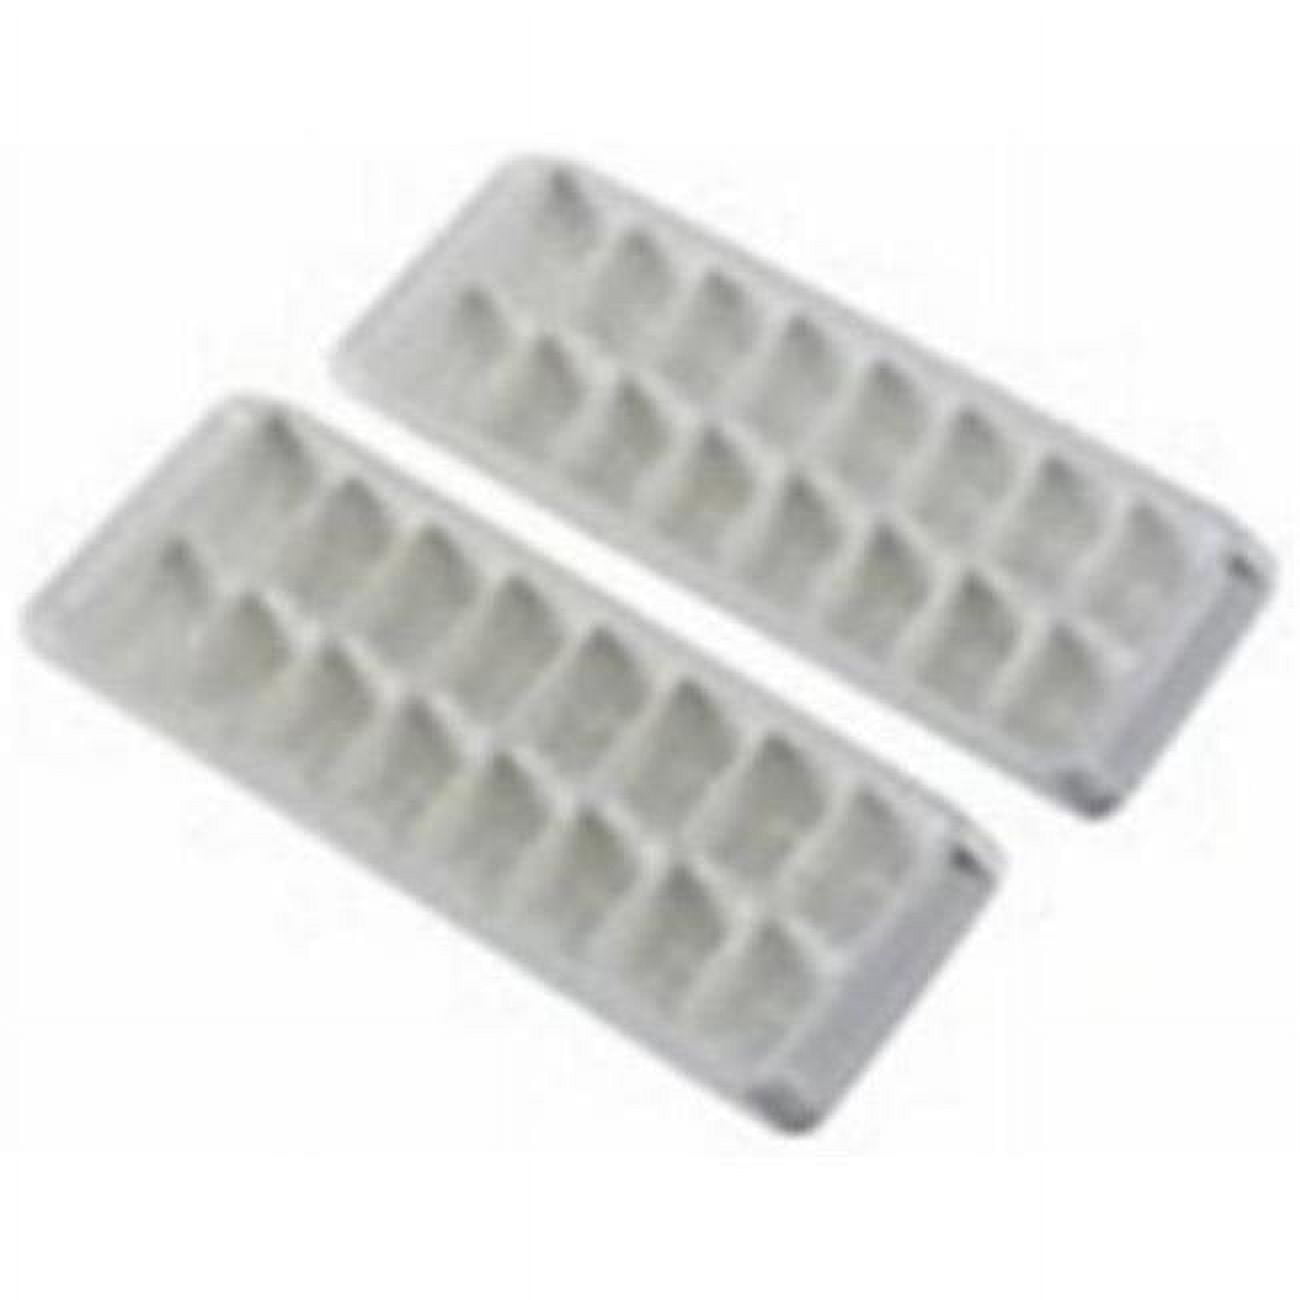 Zulay Kitchen Silicone Ice Cube Trays Set of 2 - On Sale - Bed Bath &  Beyond - 39044487